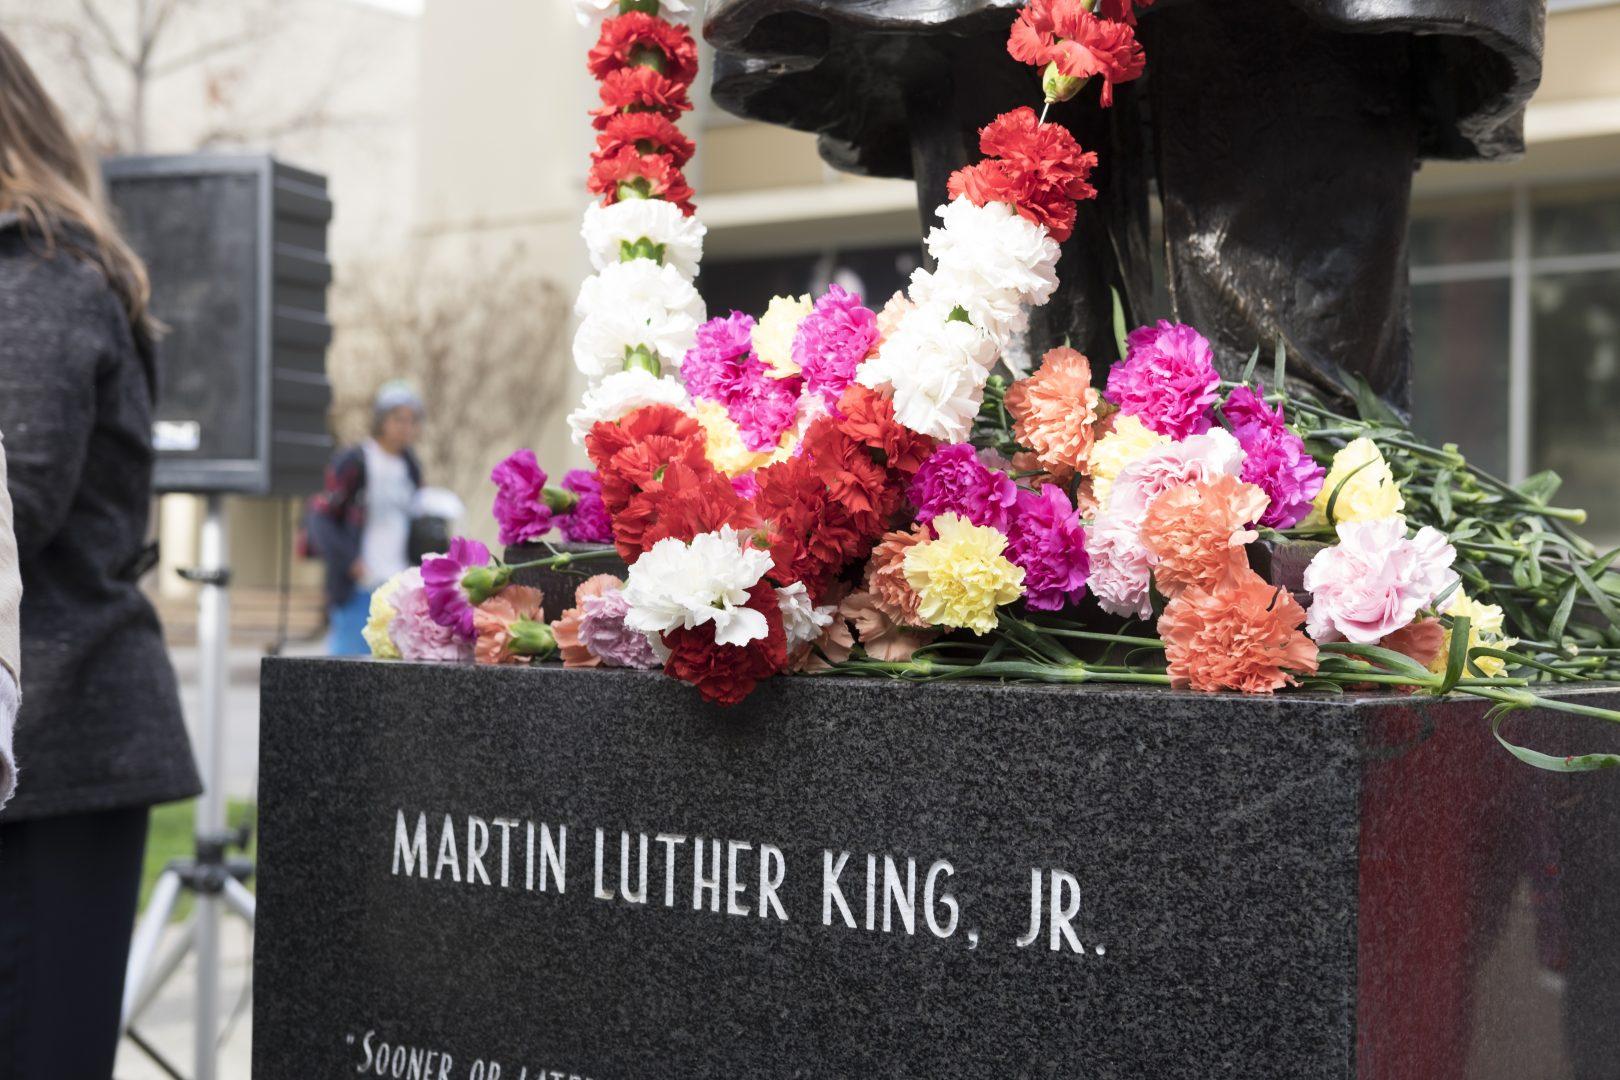 The flowers left by attendees of the Dr. Martin Luther King Jr. Commemoration at the Peace Garden on Thursday, Jan. 18, 2018. (Ramuel Reyes/The Collegian)